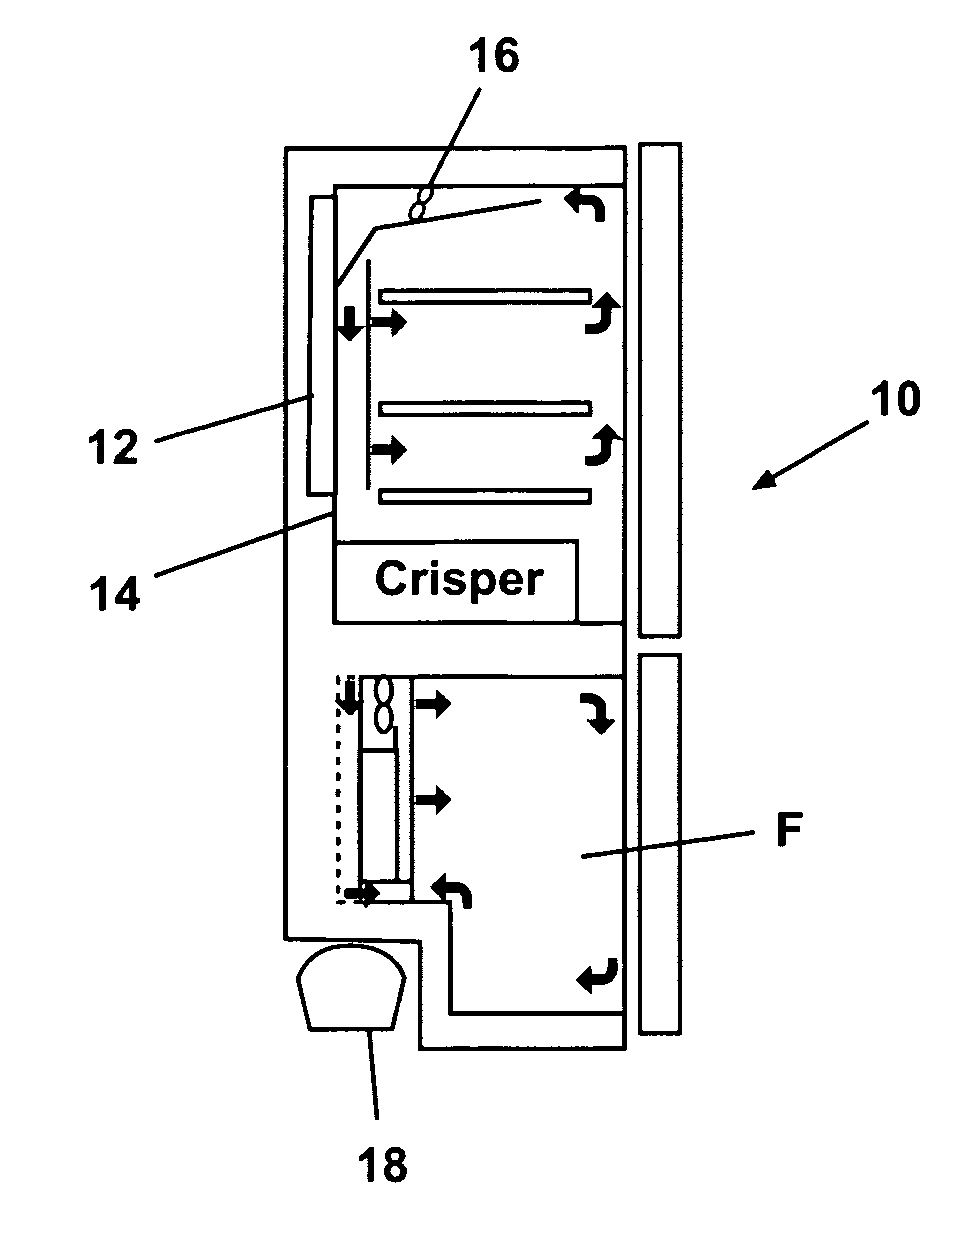 Method for controlling humidity in a domestic refrigerator, and refrigerator adapted to carry out such method